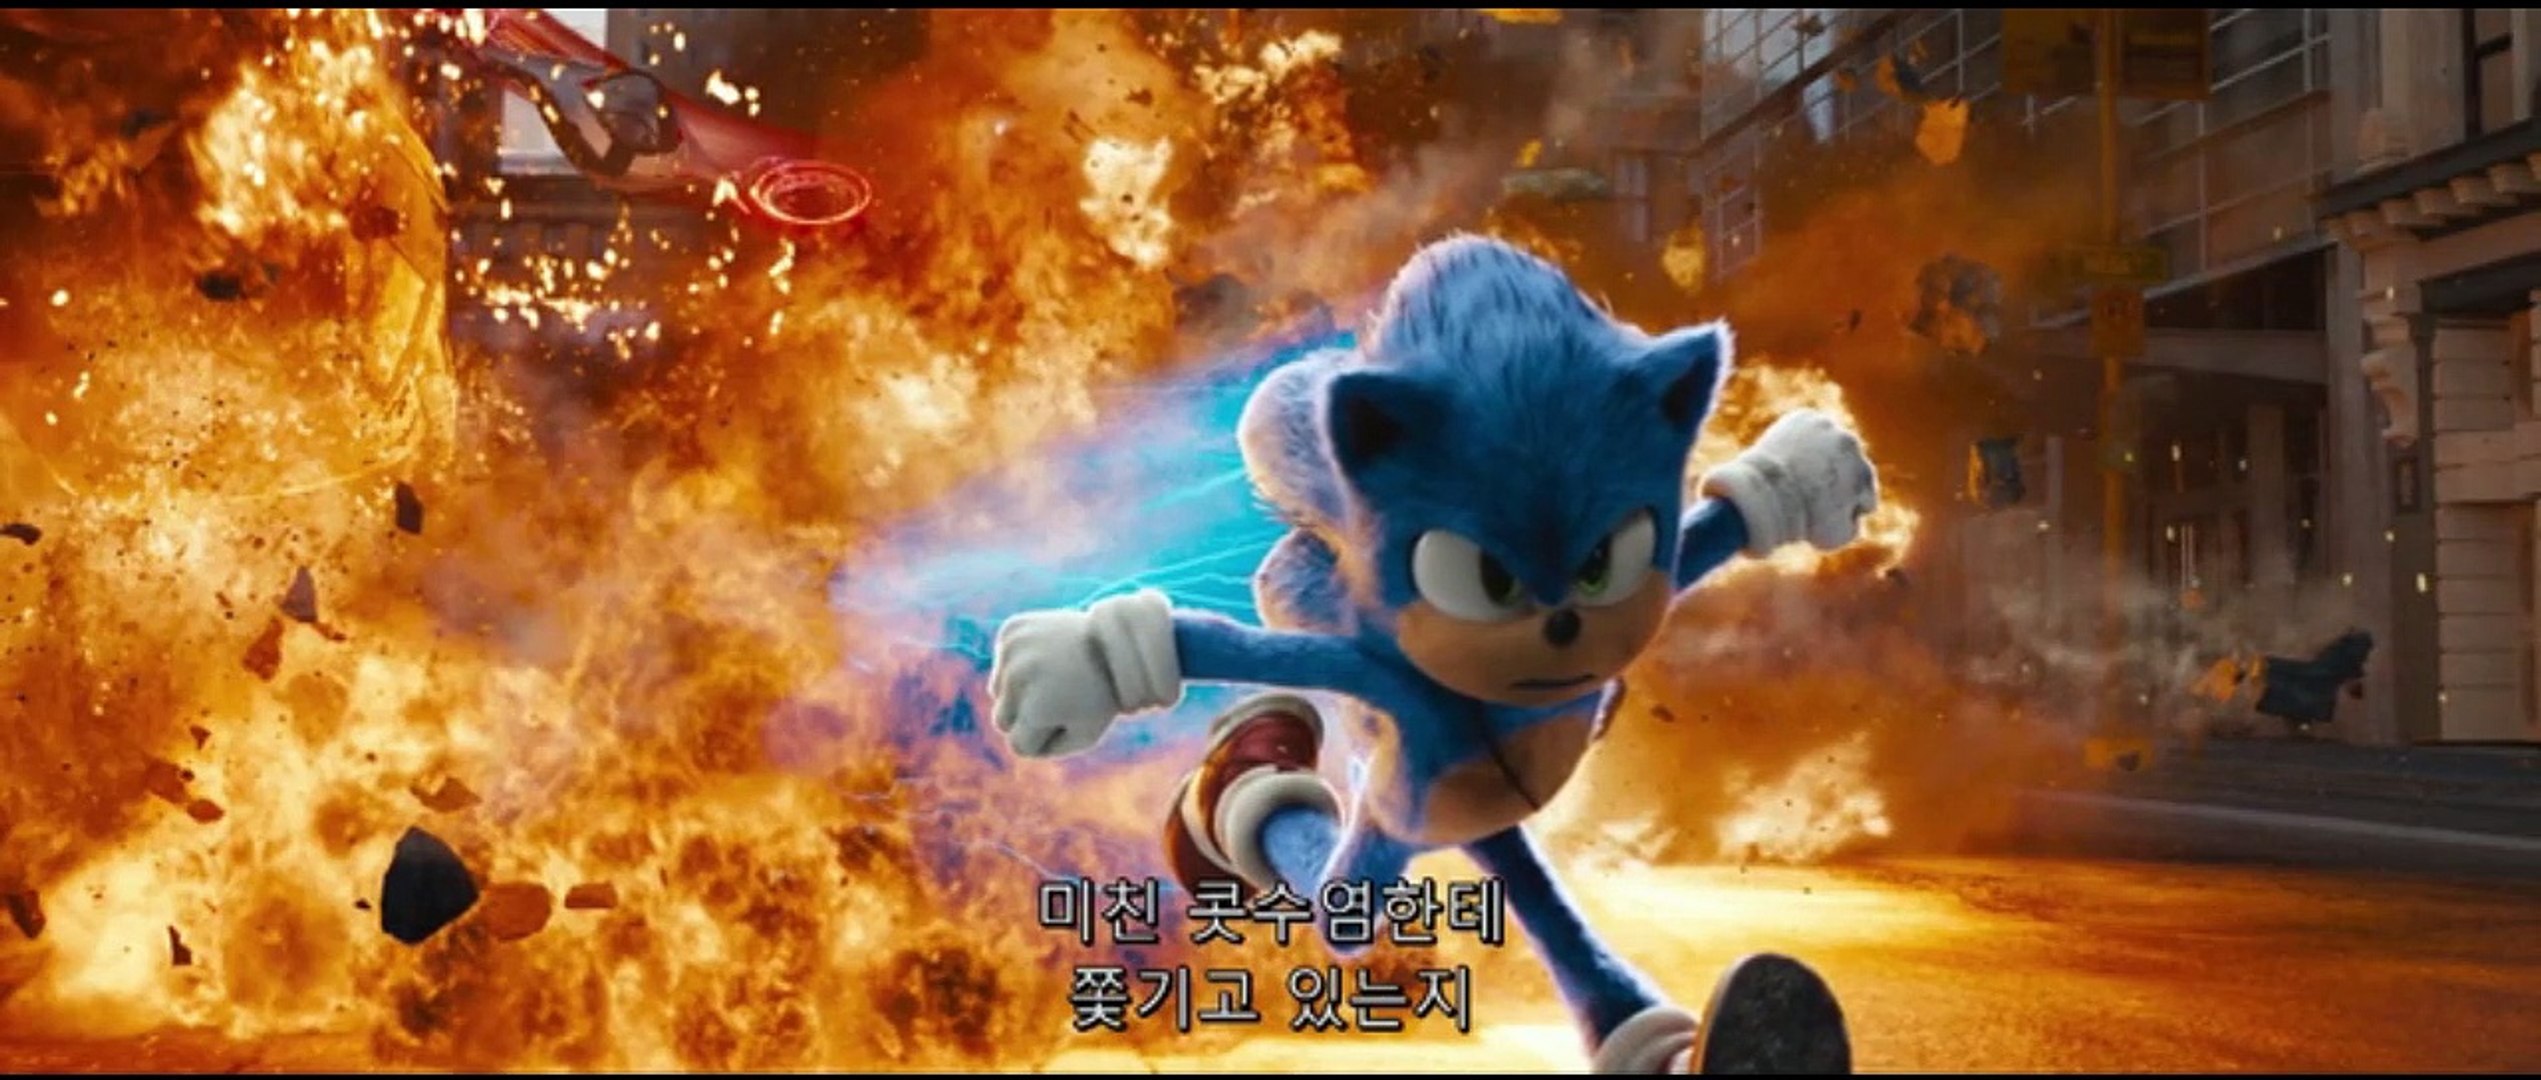 Sonic the Hedgehog (2020) Stream and Watch Online